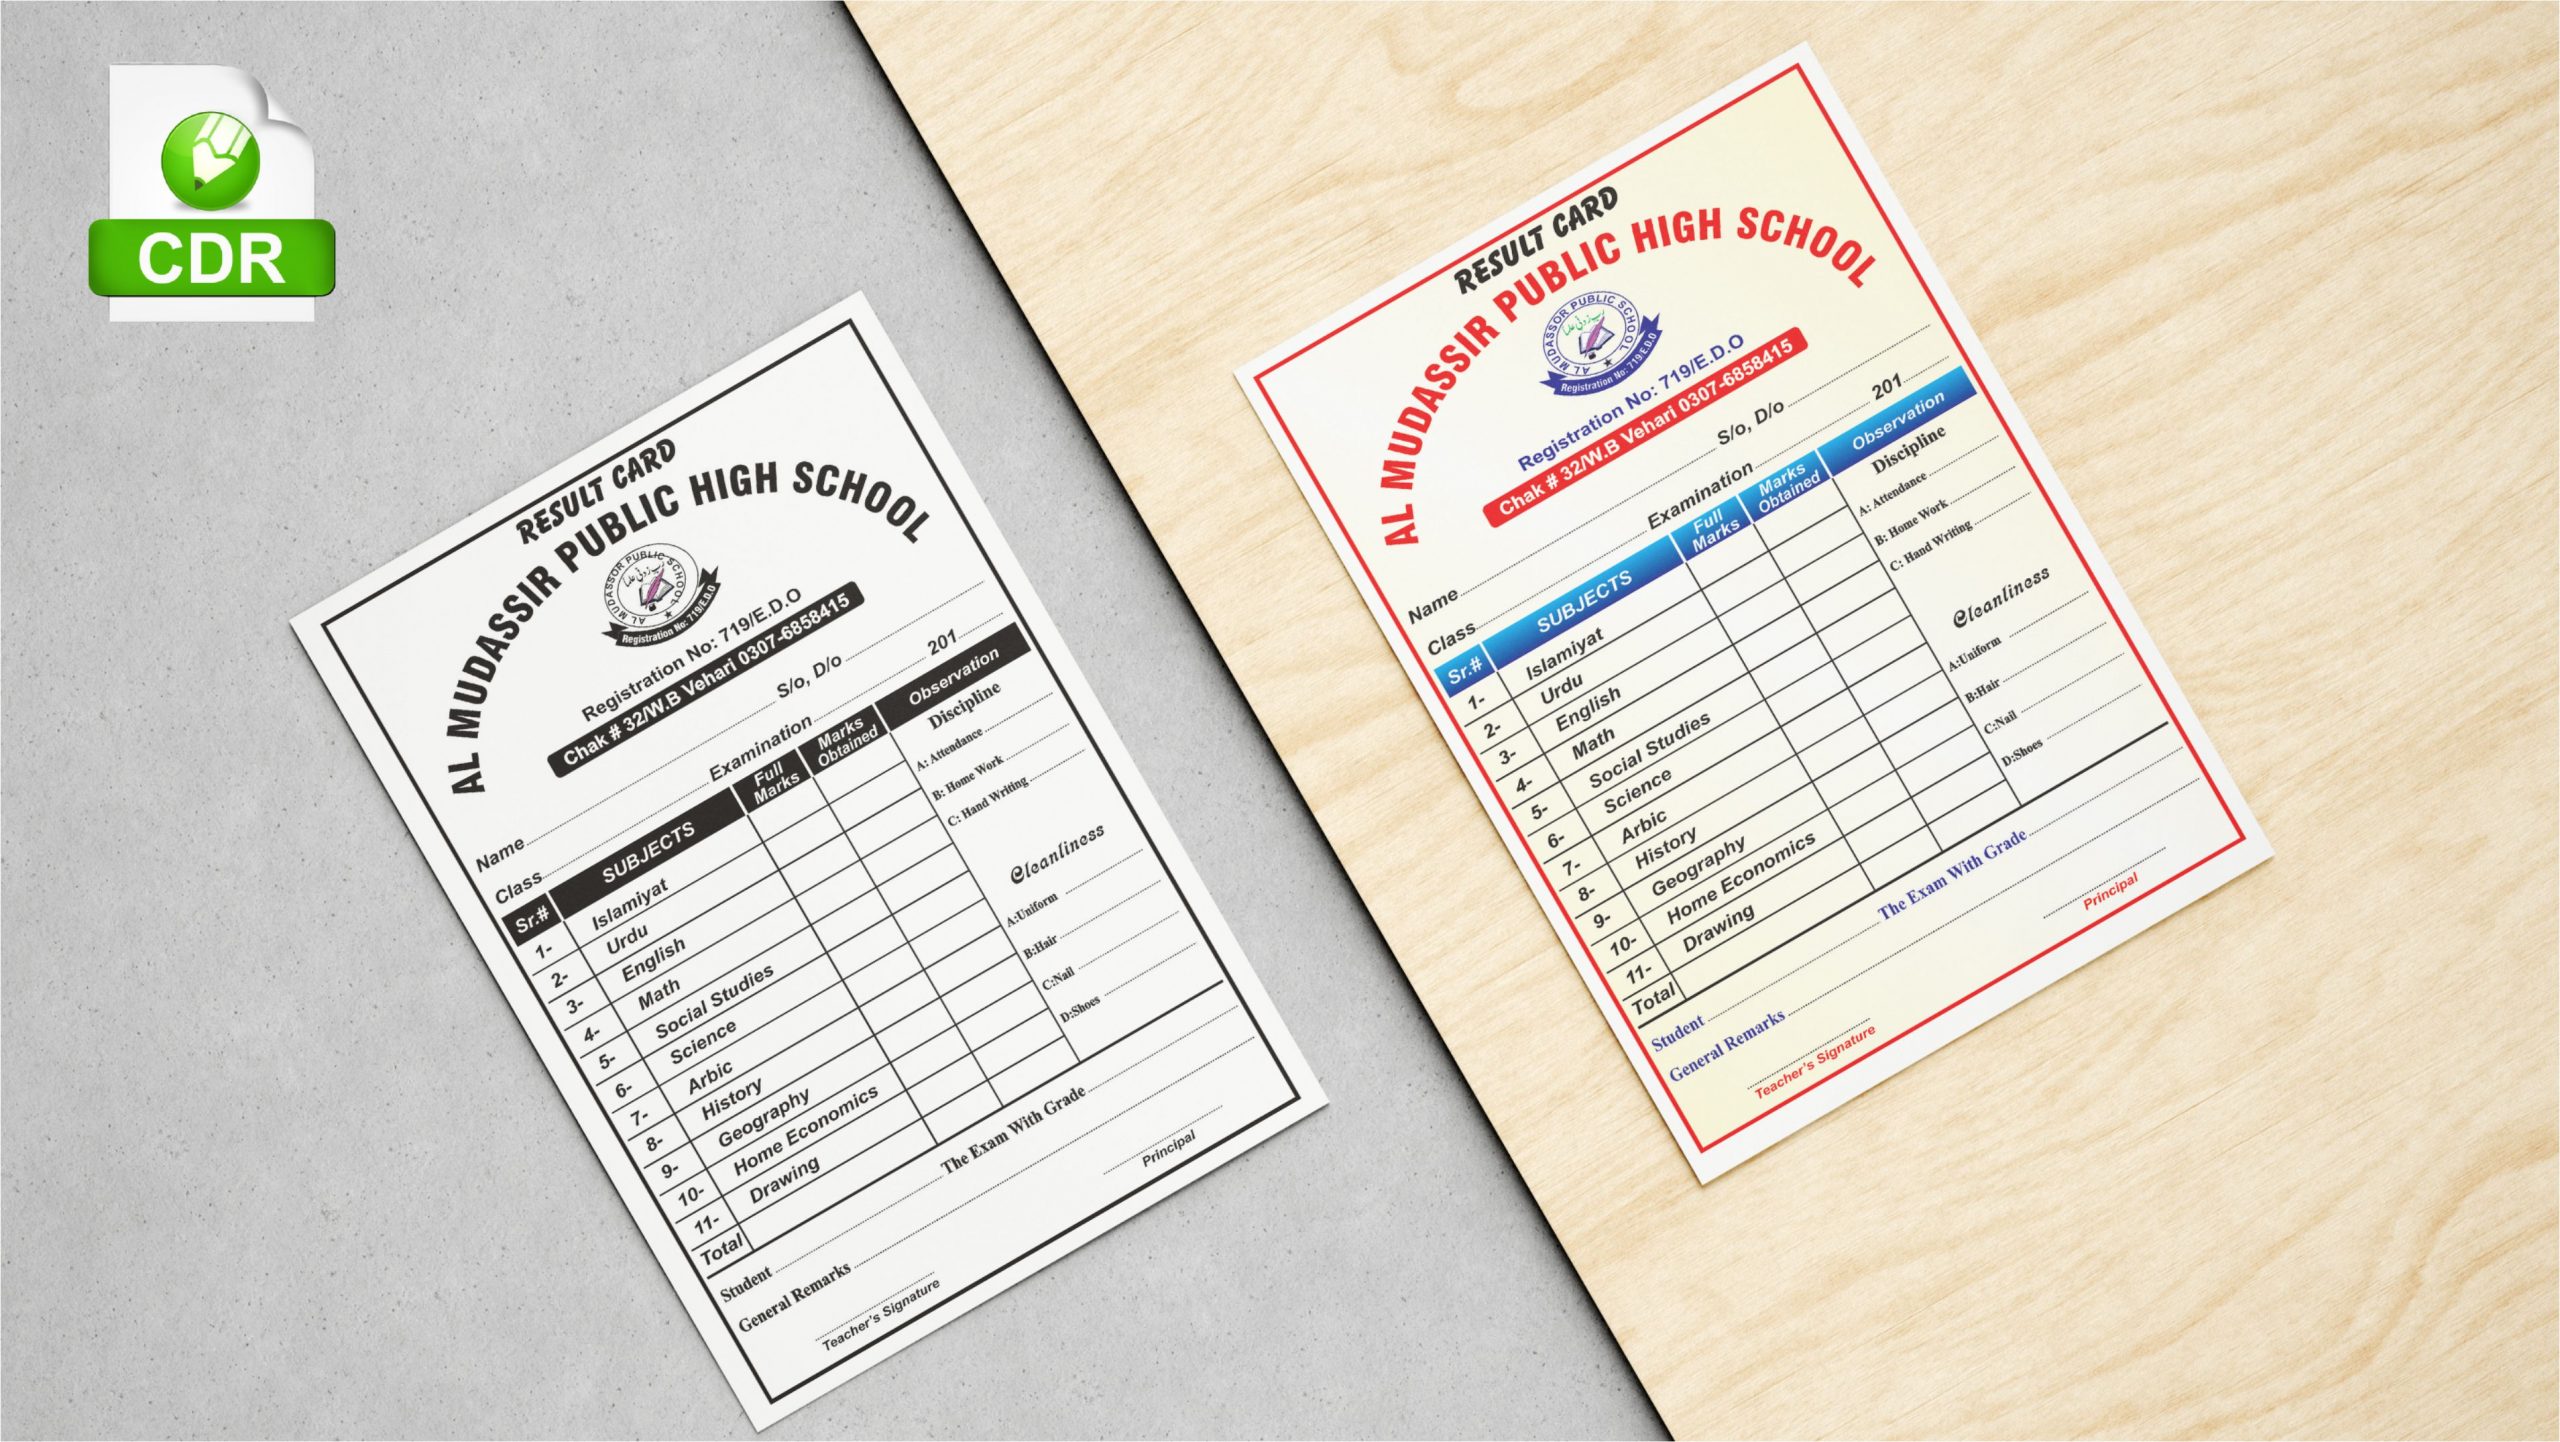 student result card template free download